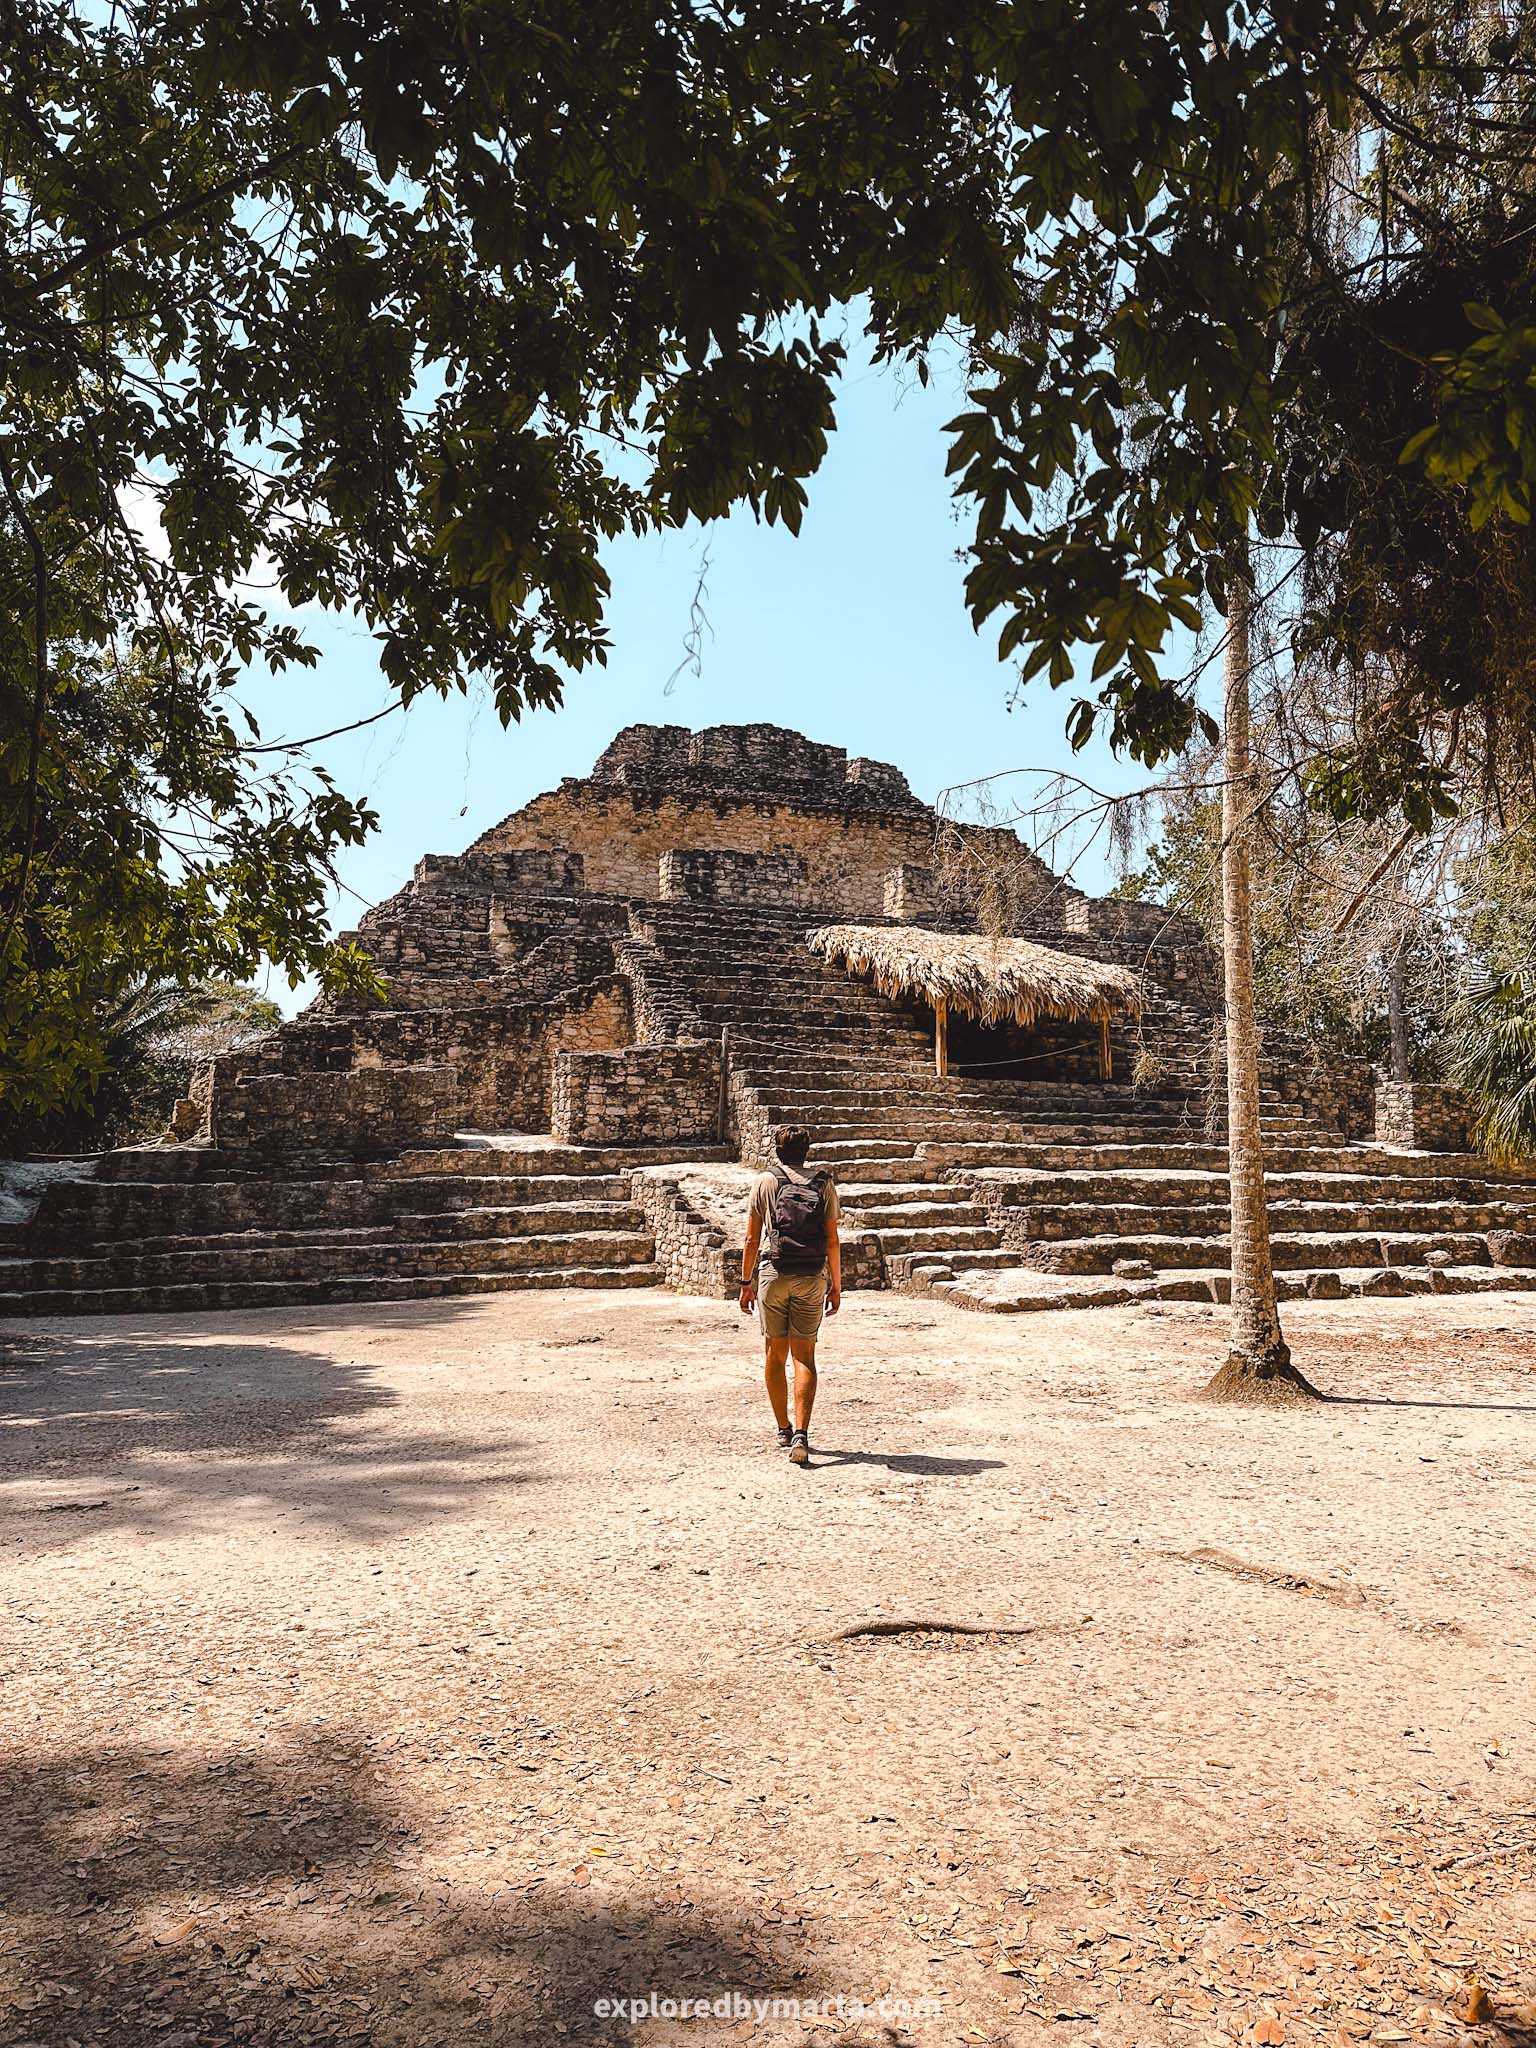 Chacchoben Archaeological Zone in Mexico